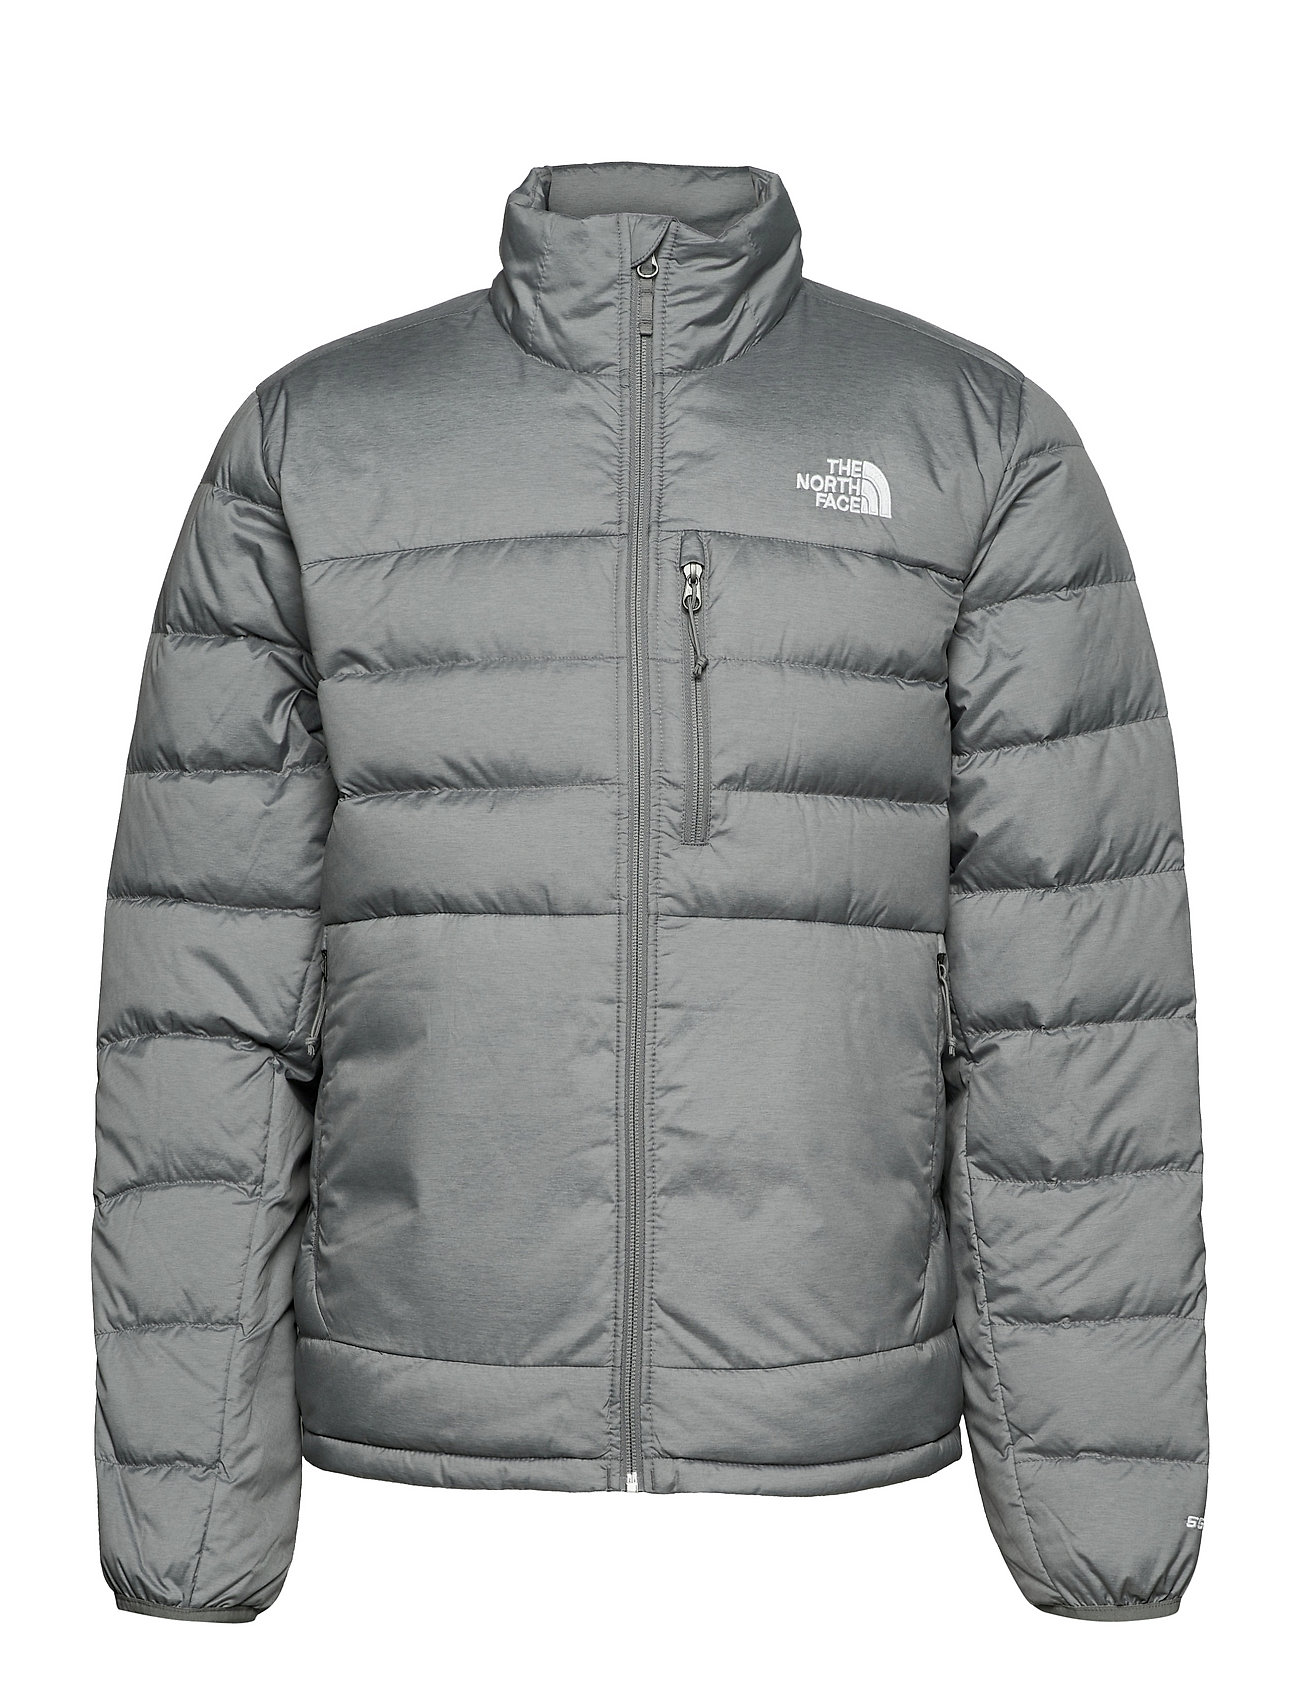 M Acncga 2 Jkt Outerwear Sport Jackets Harmaa The North Face